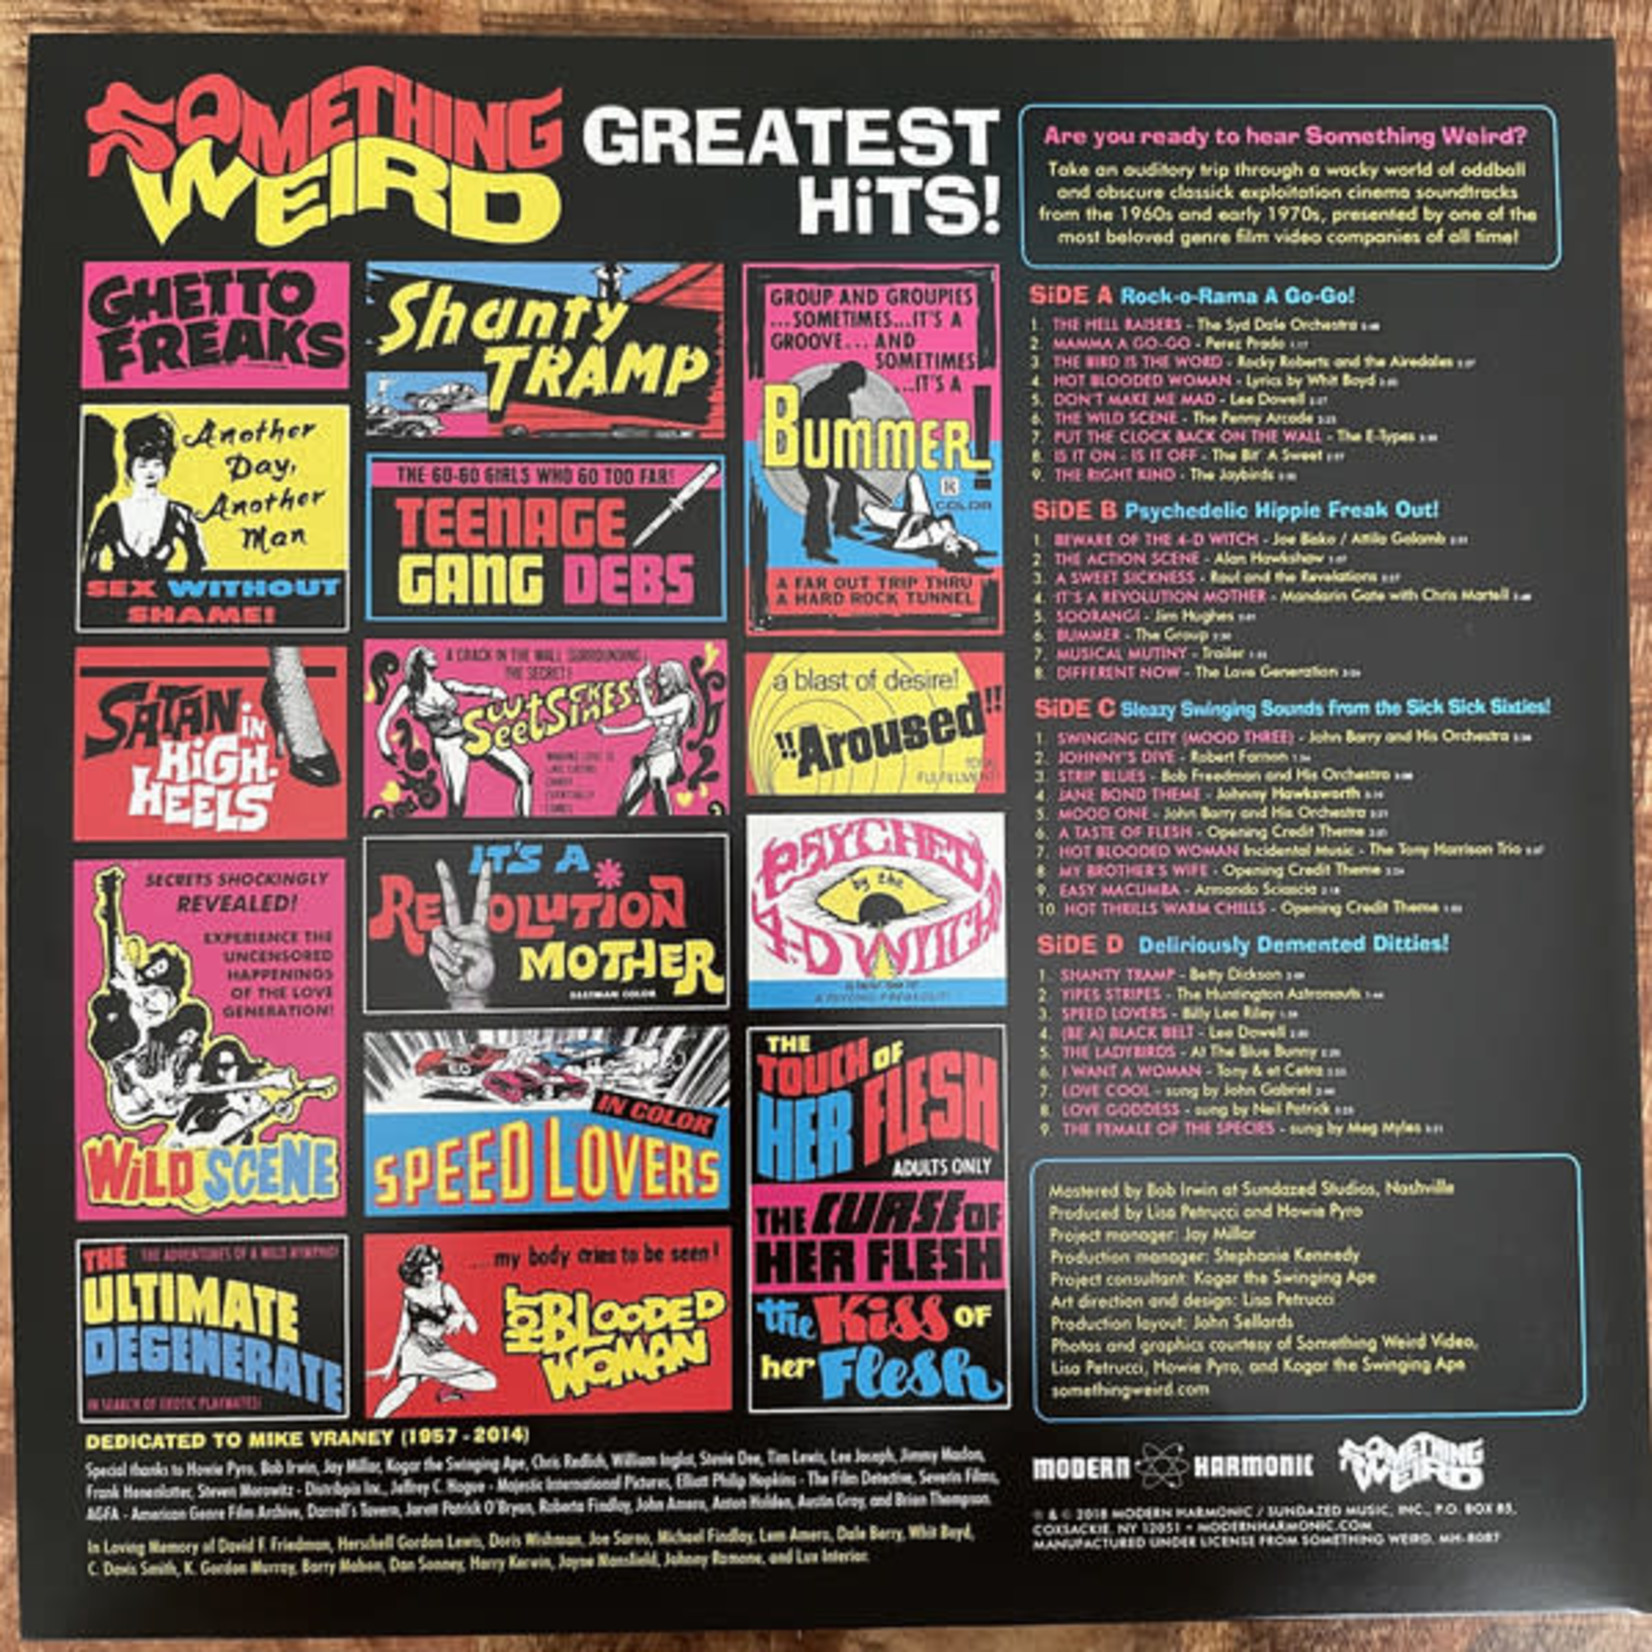 Modern Harmonic V/A - Something Weird Greatest Hits (2LP) Yellow picture